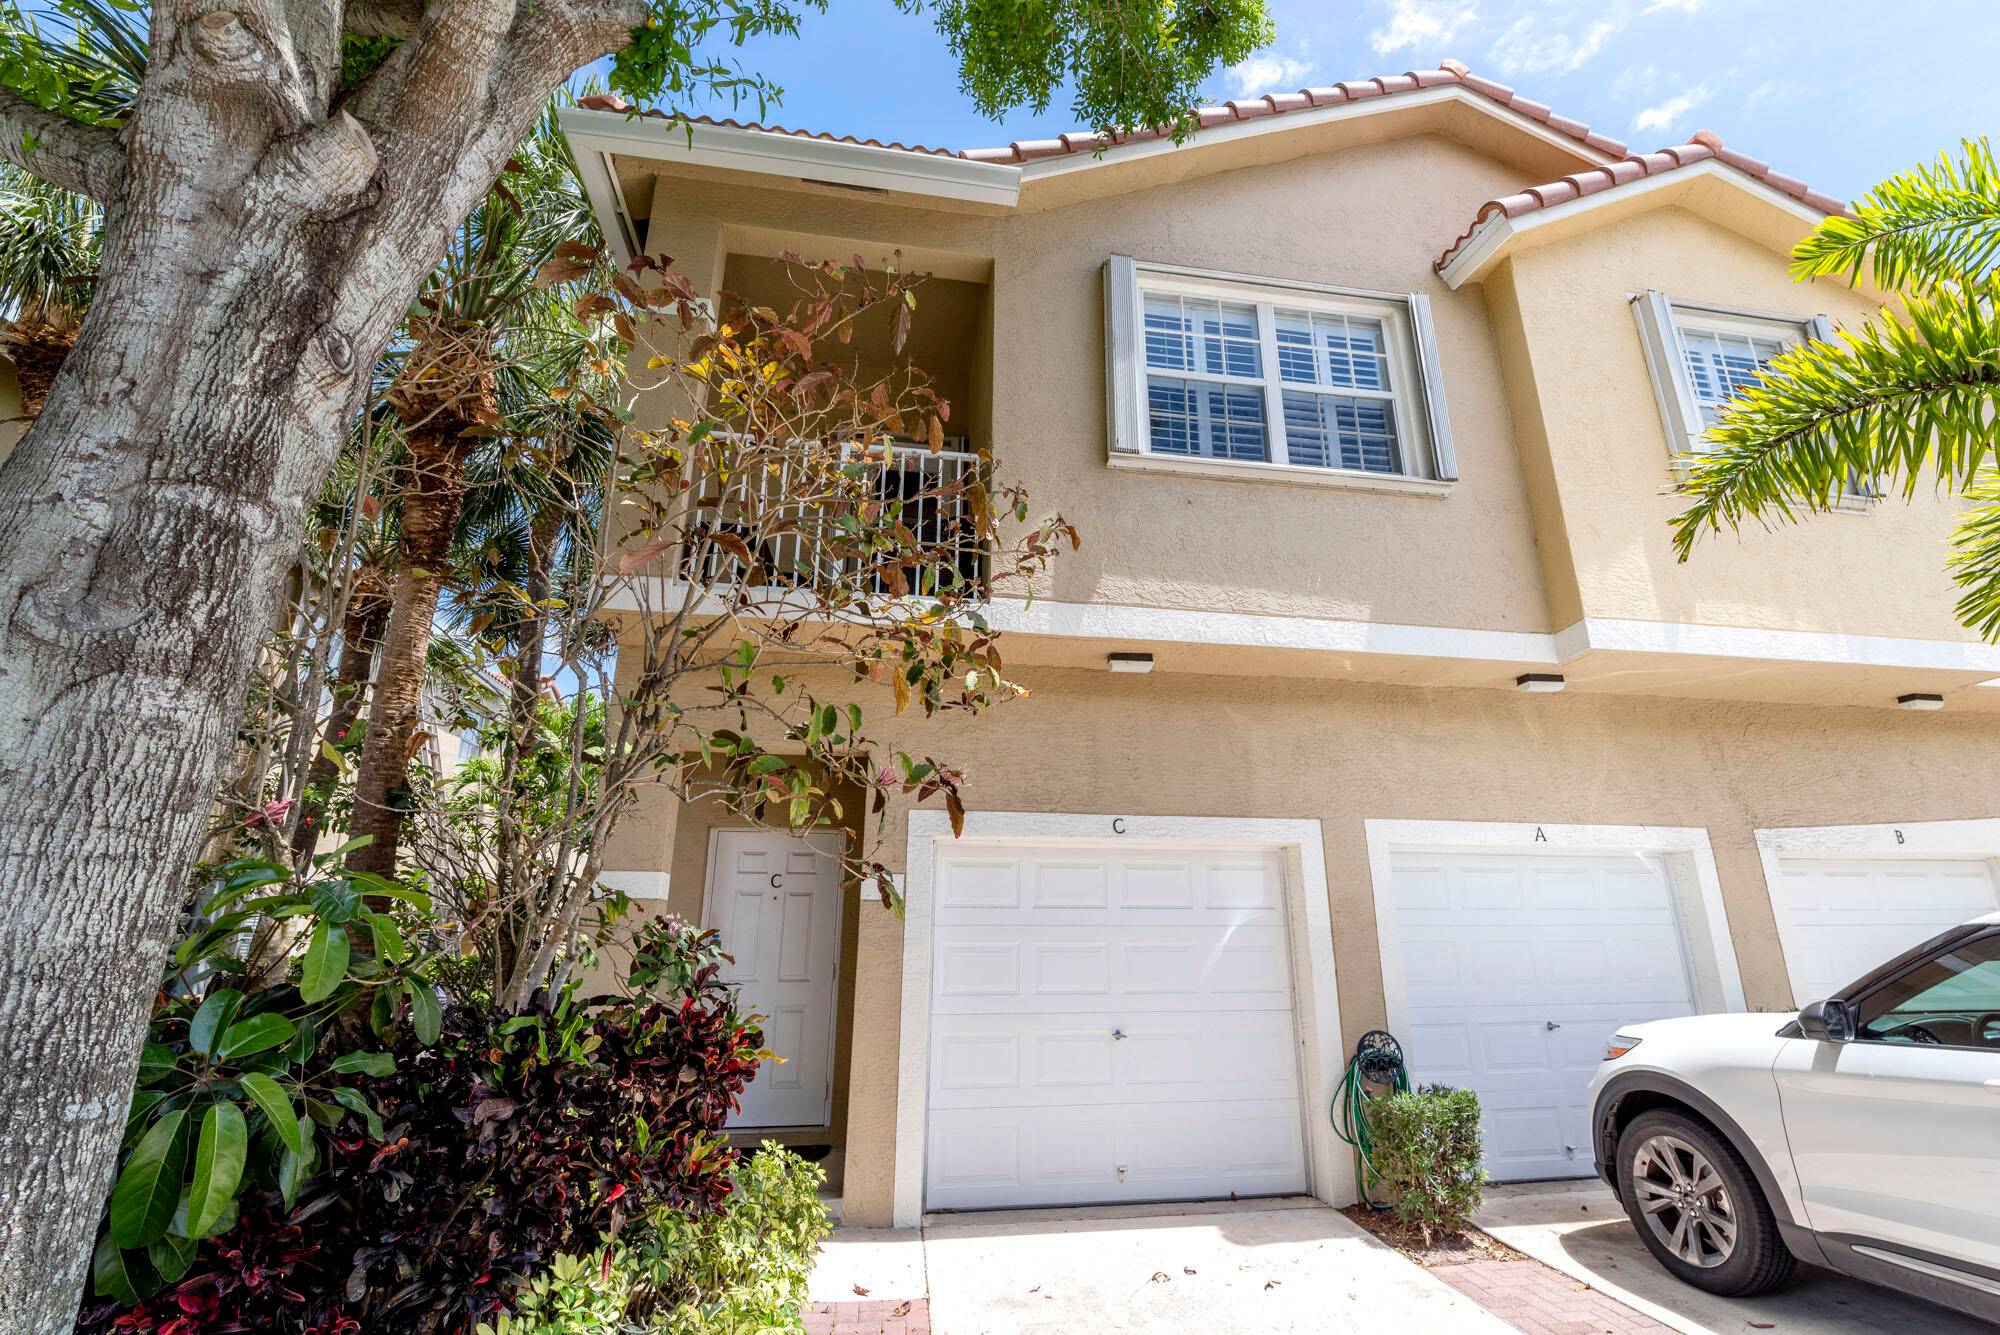 Discover the charm of Tequesta living with these fantastic 2 bedroom, 2 bathroom townhomes.